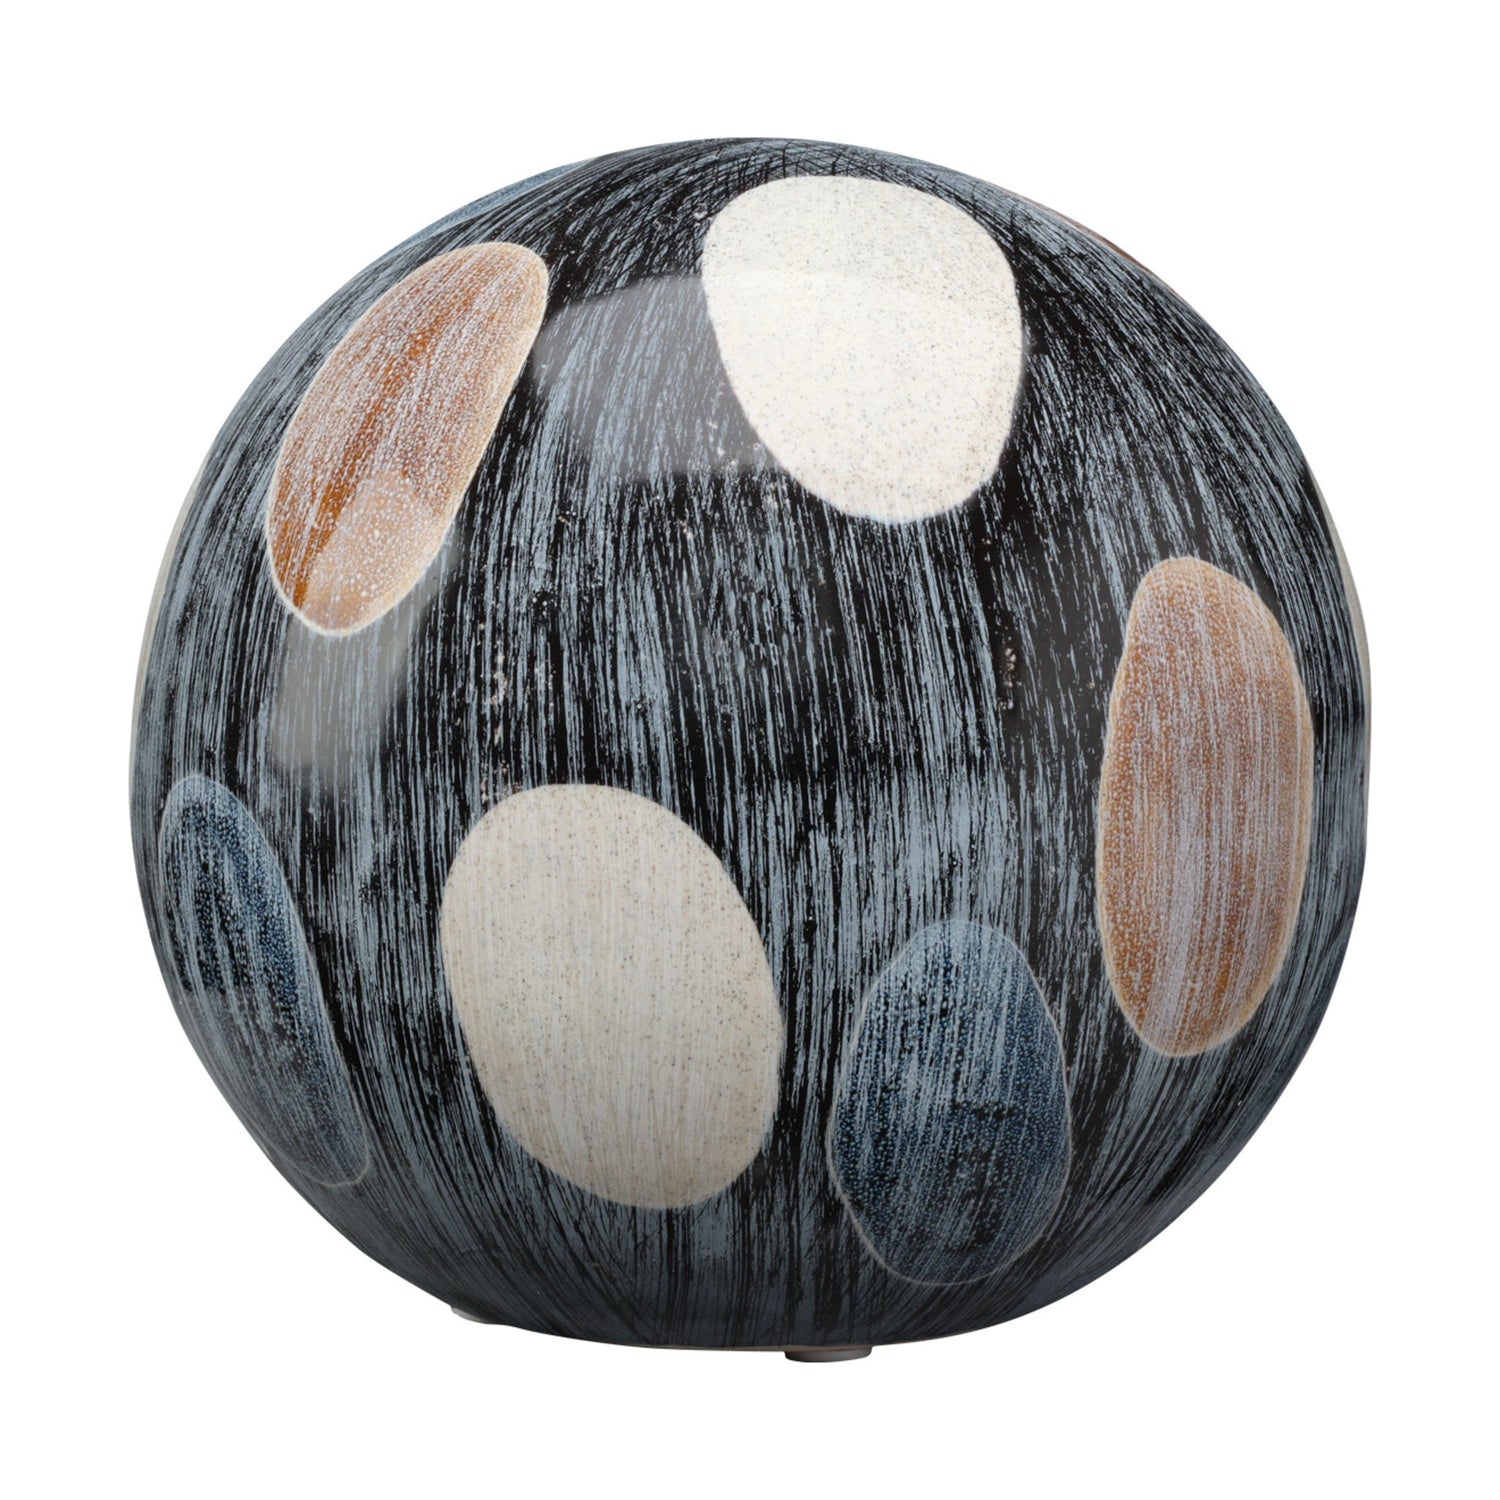 Jamie Young Company - 7PAIN-SMCR - Painted Sphere - Painted - Blue